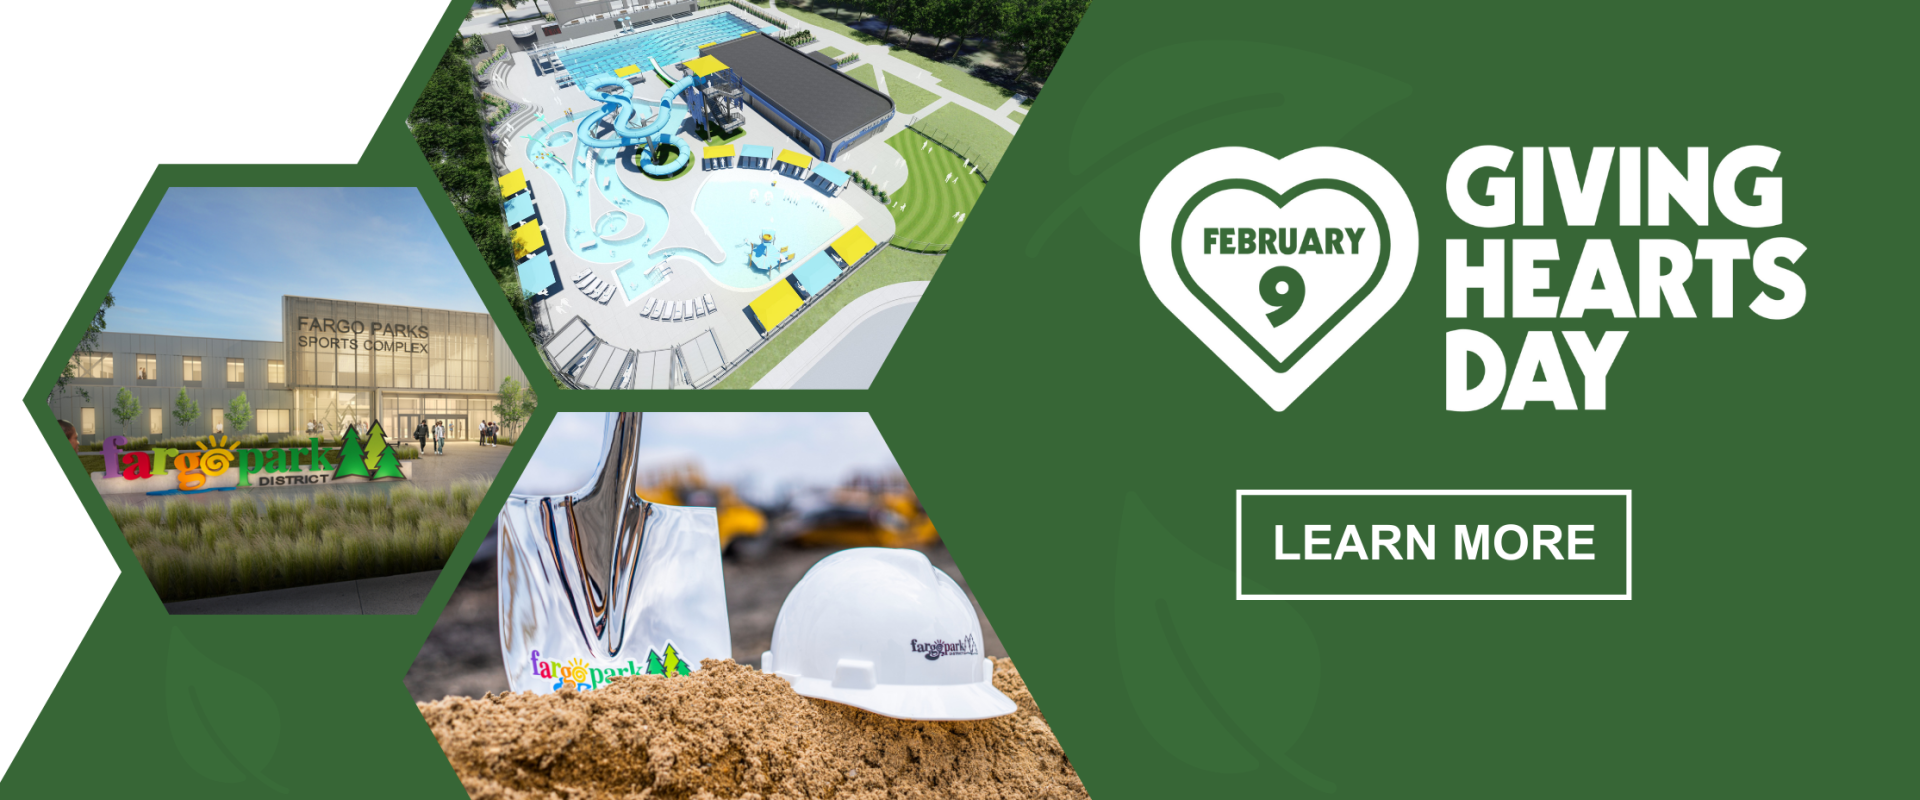 This photo shows the Fargo Parks Sports Complex, a shovel and hard hat in dirt, the Island Park Pool Renderings and the Foundation and Giving Hearts Day logos